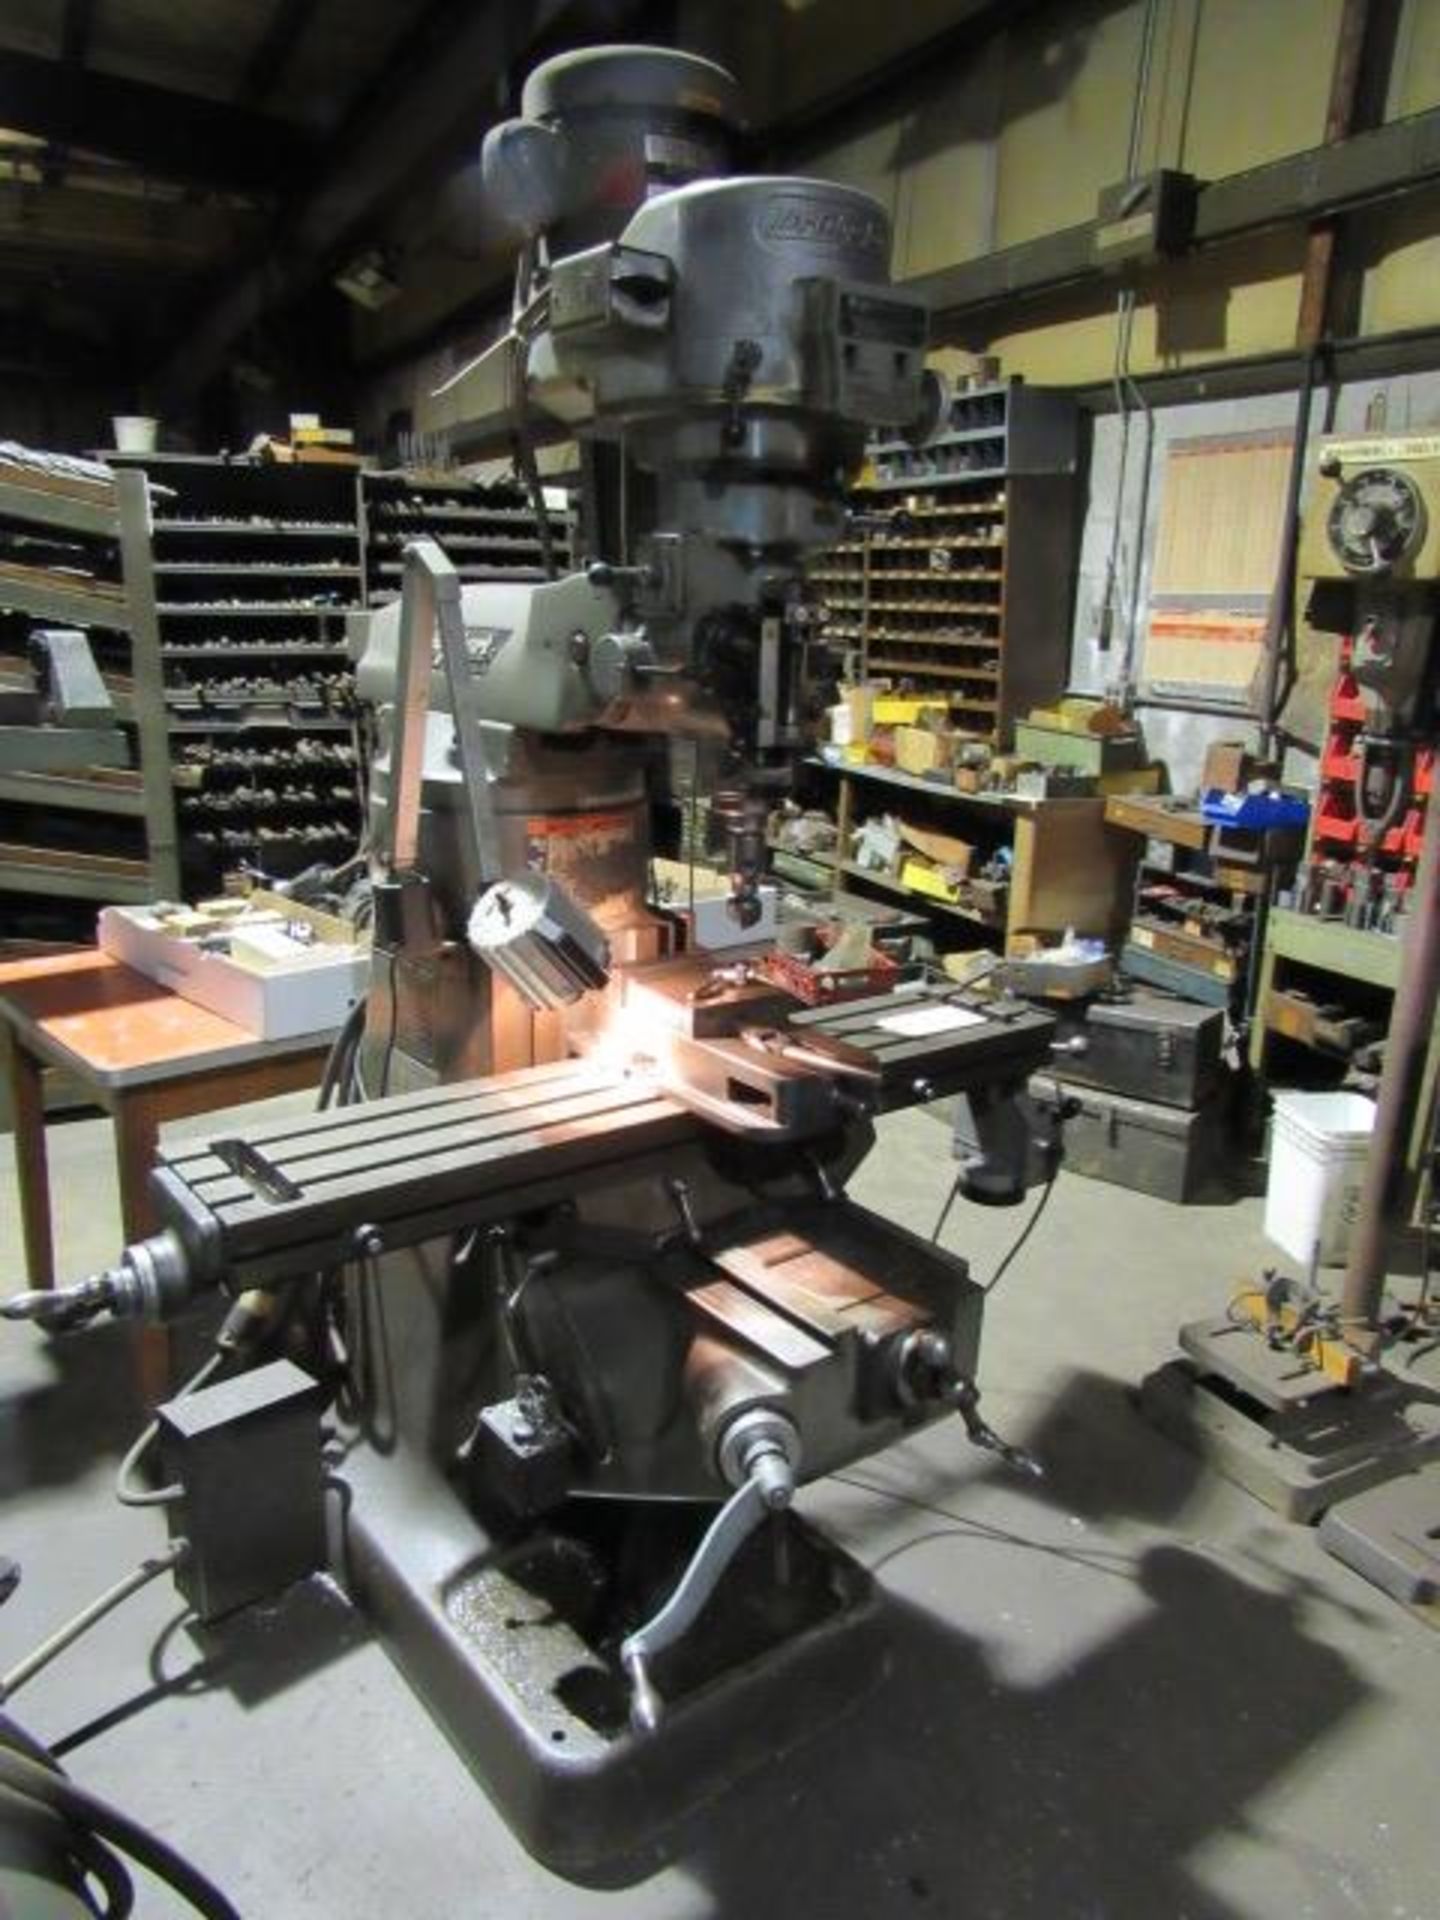 Bridgeport Variable Speed Knee Mill with Power Feed Table, DRO's, sn:96758 - Image 2 of 7